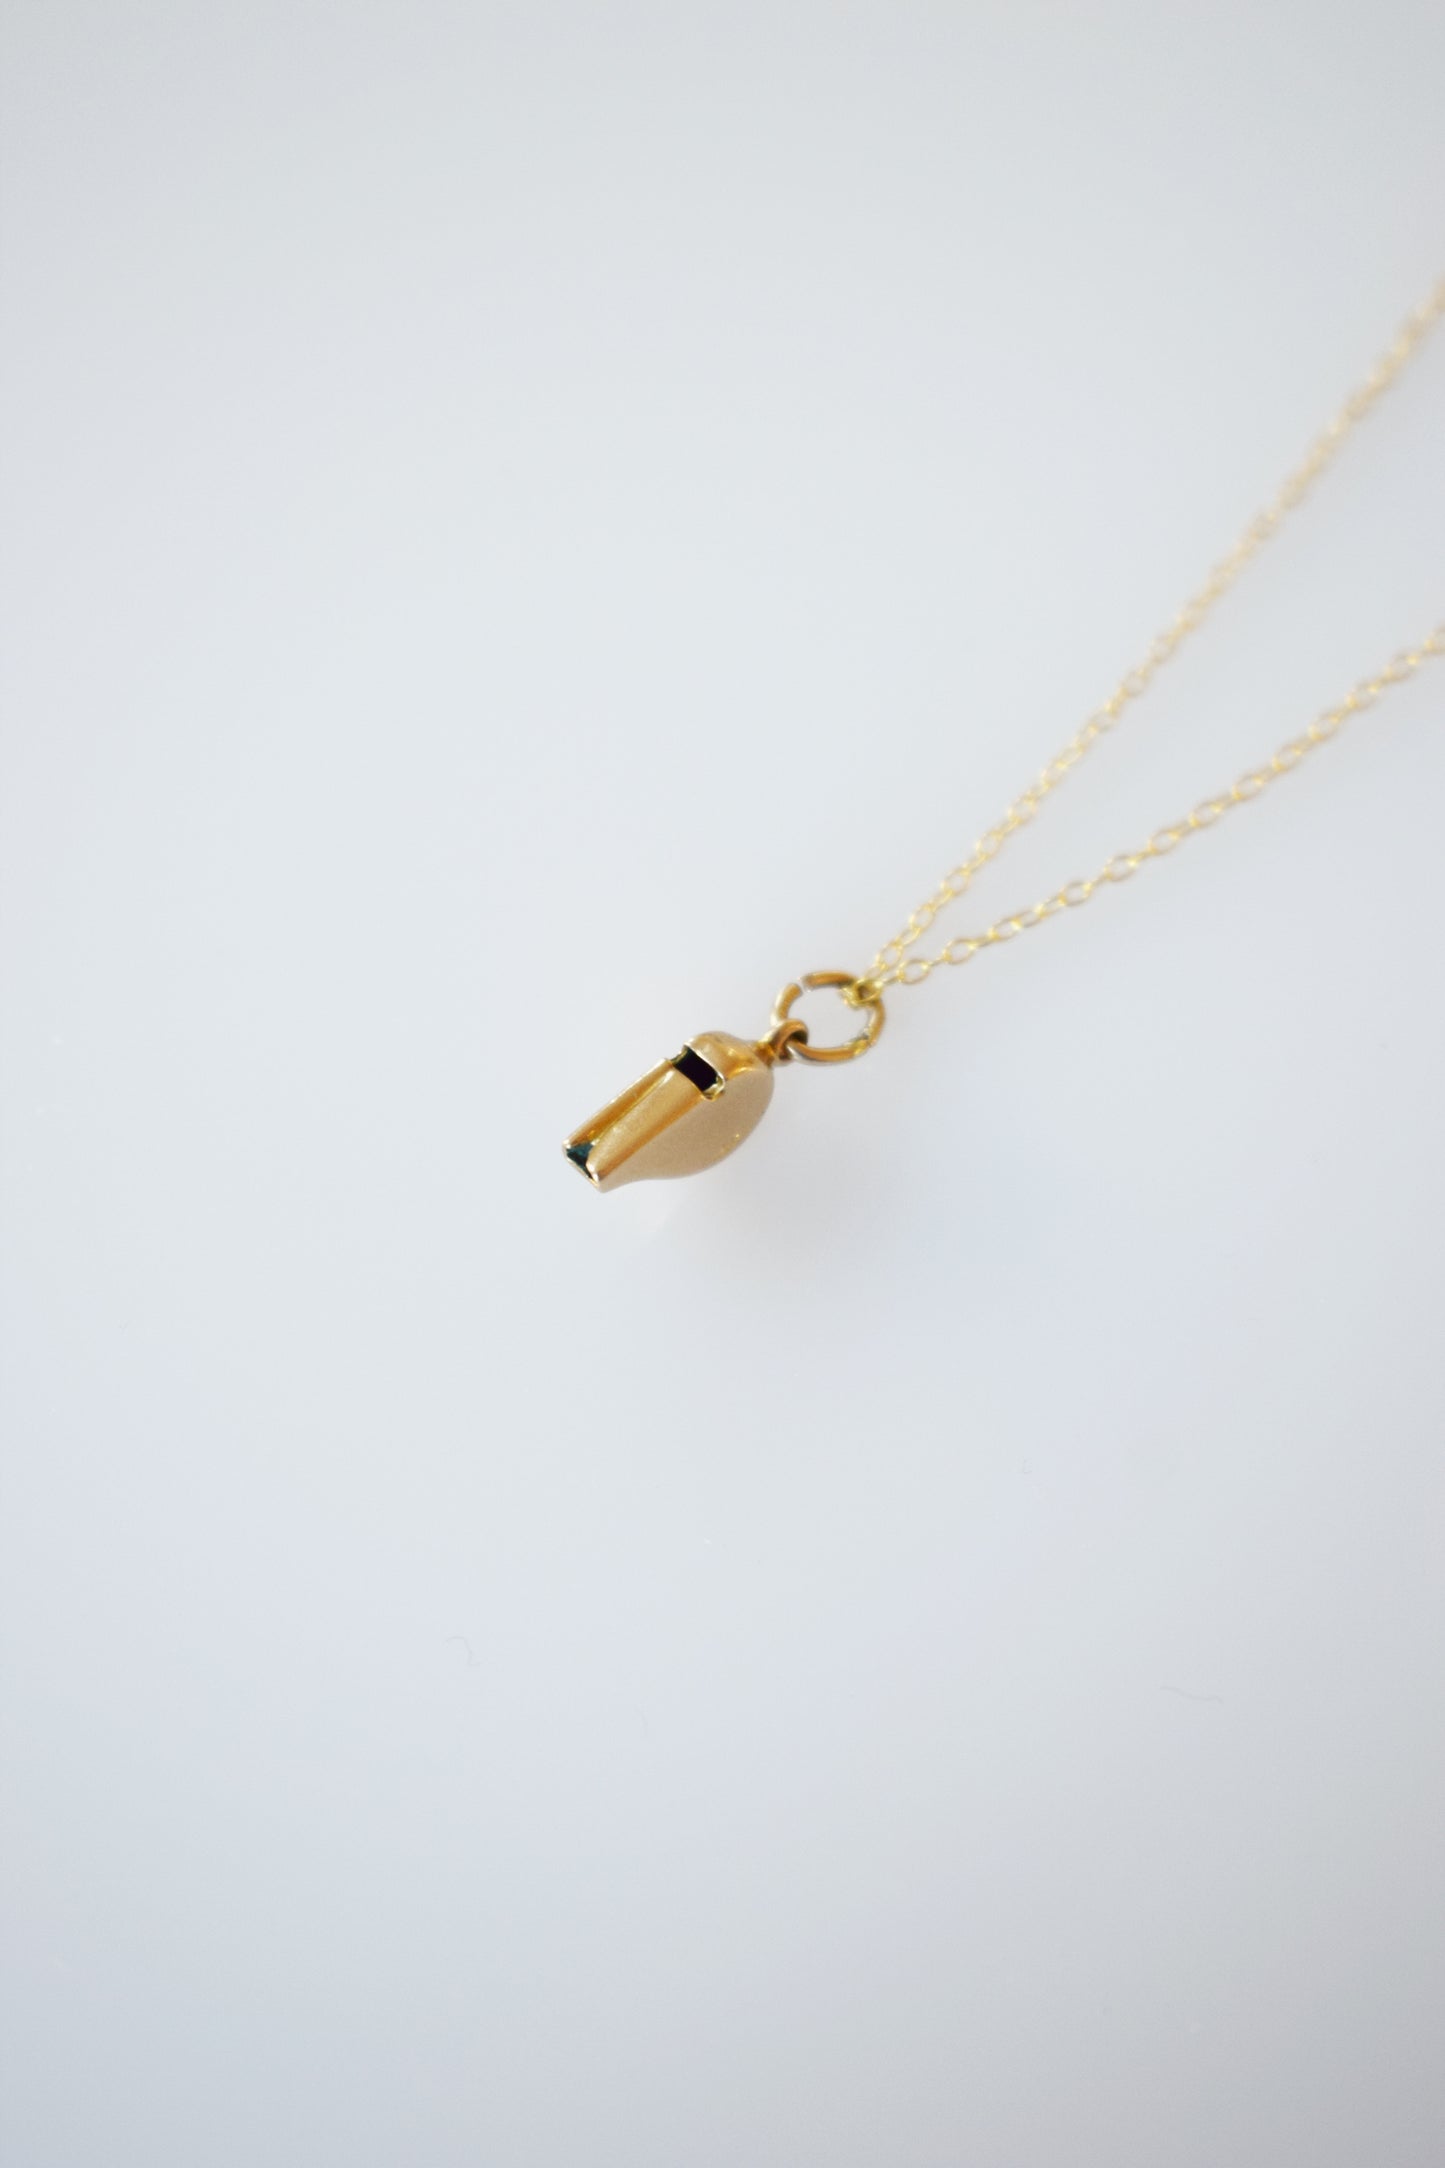 Vintage 14kt Gold Working Whistle Charm | Pendant